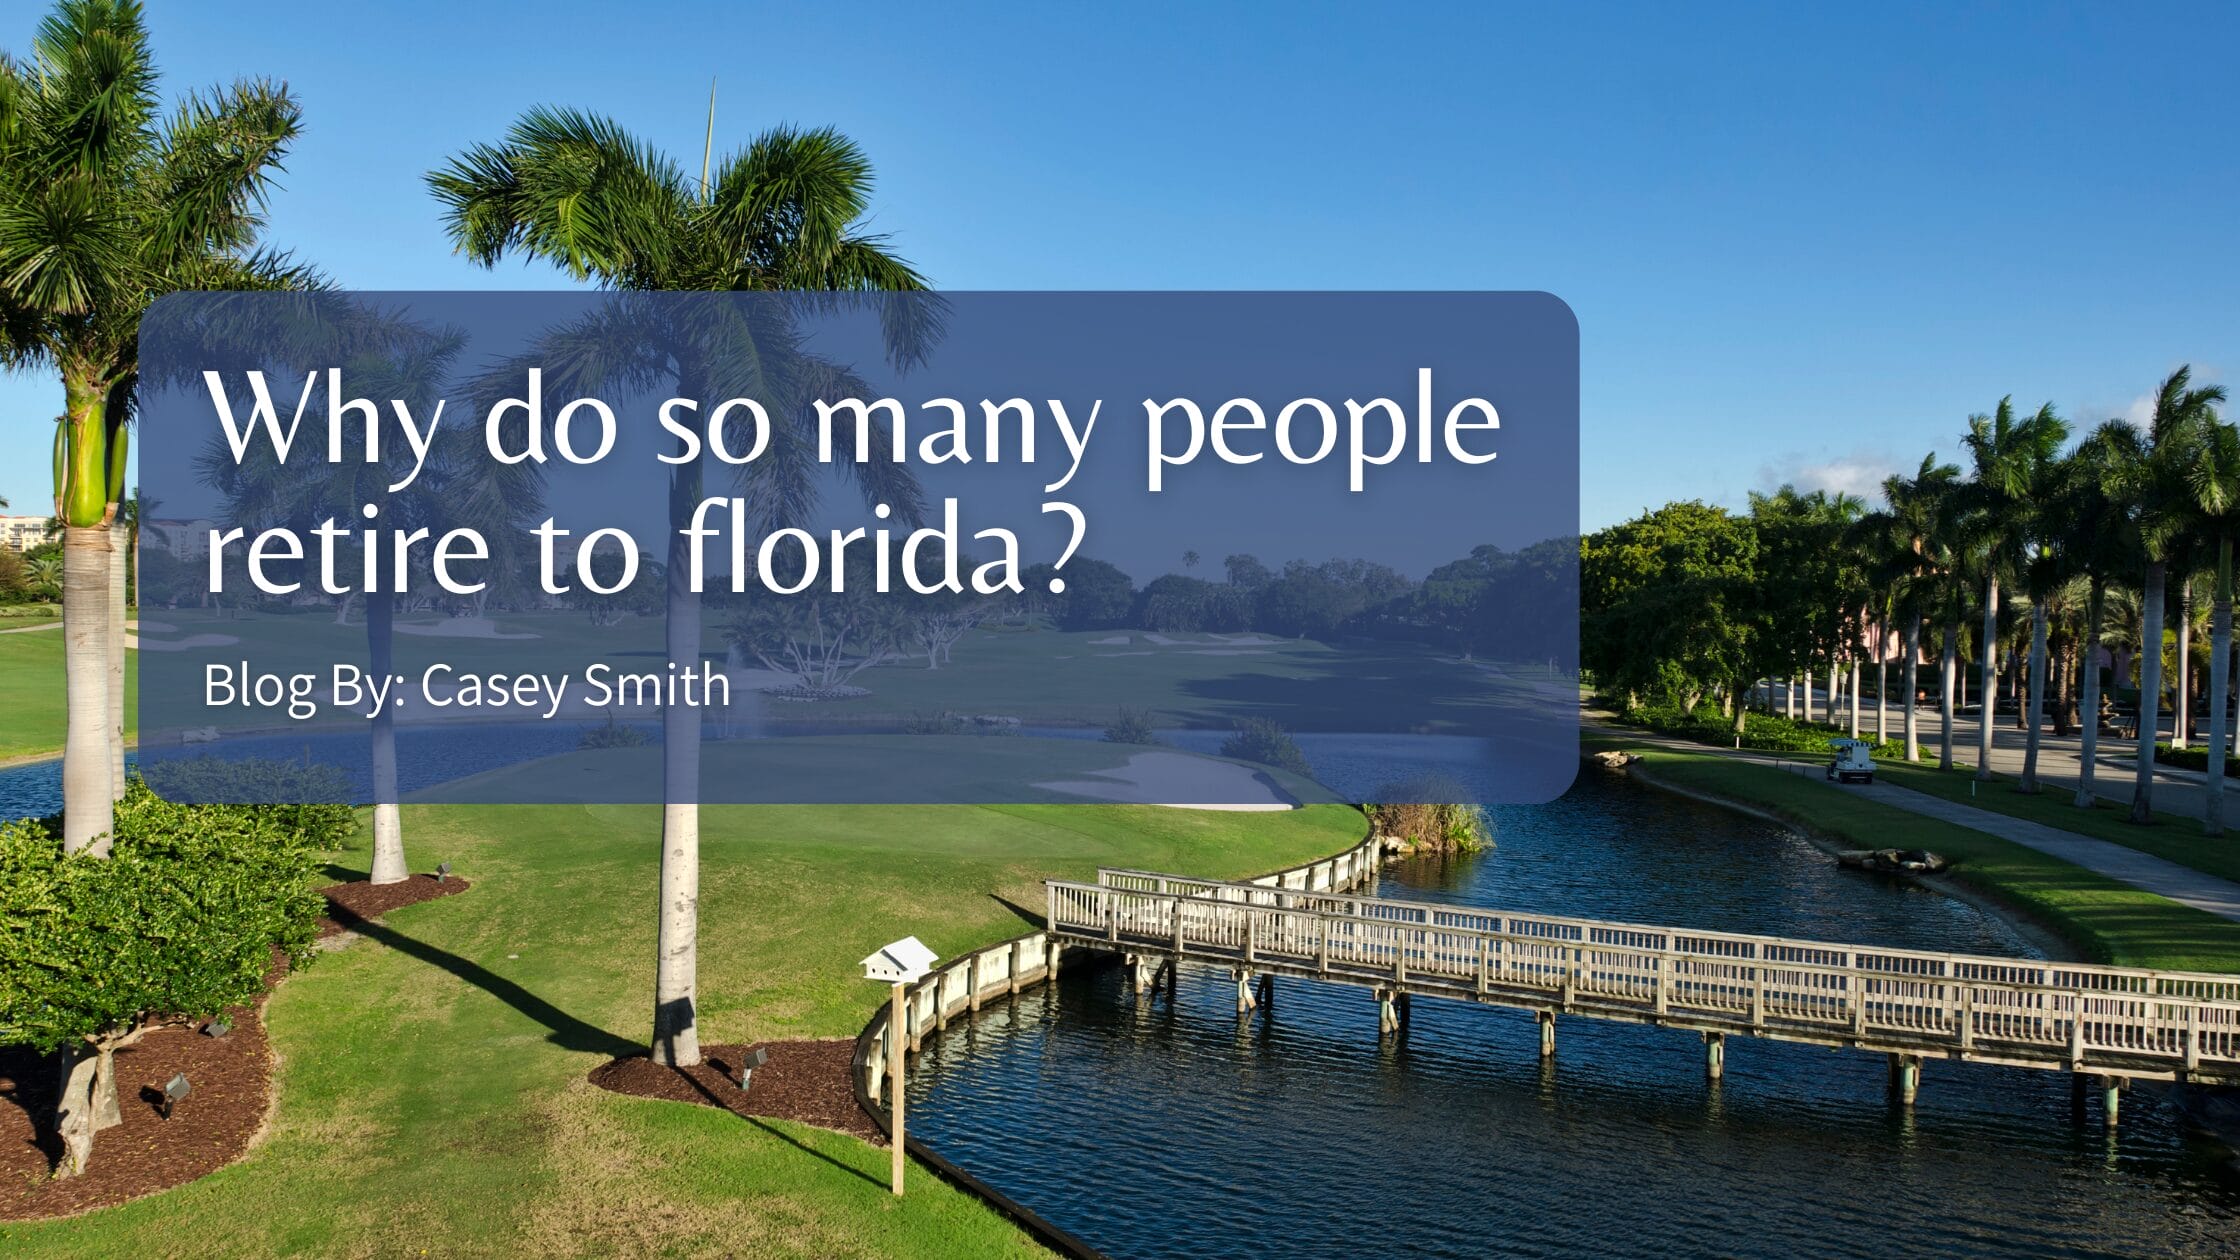 Why do so many people retire to Florida?